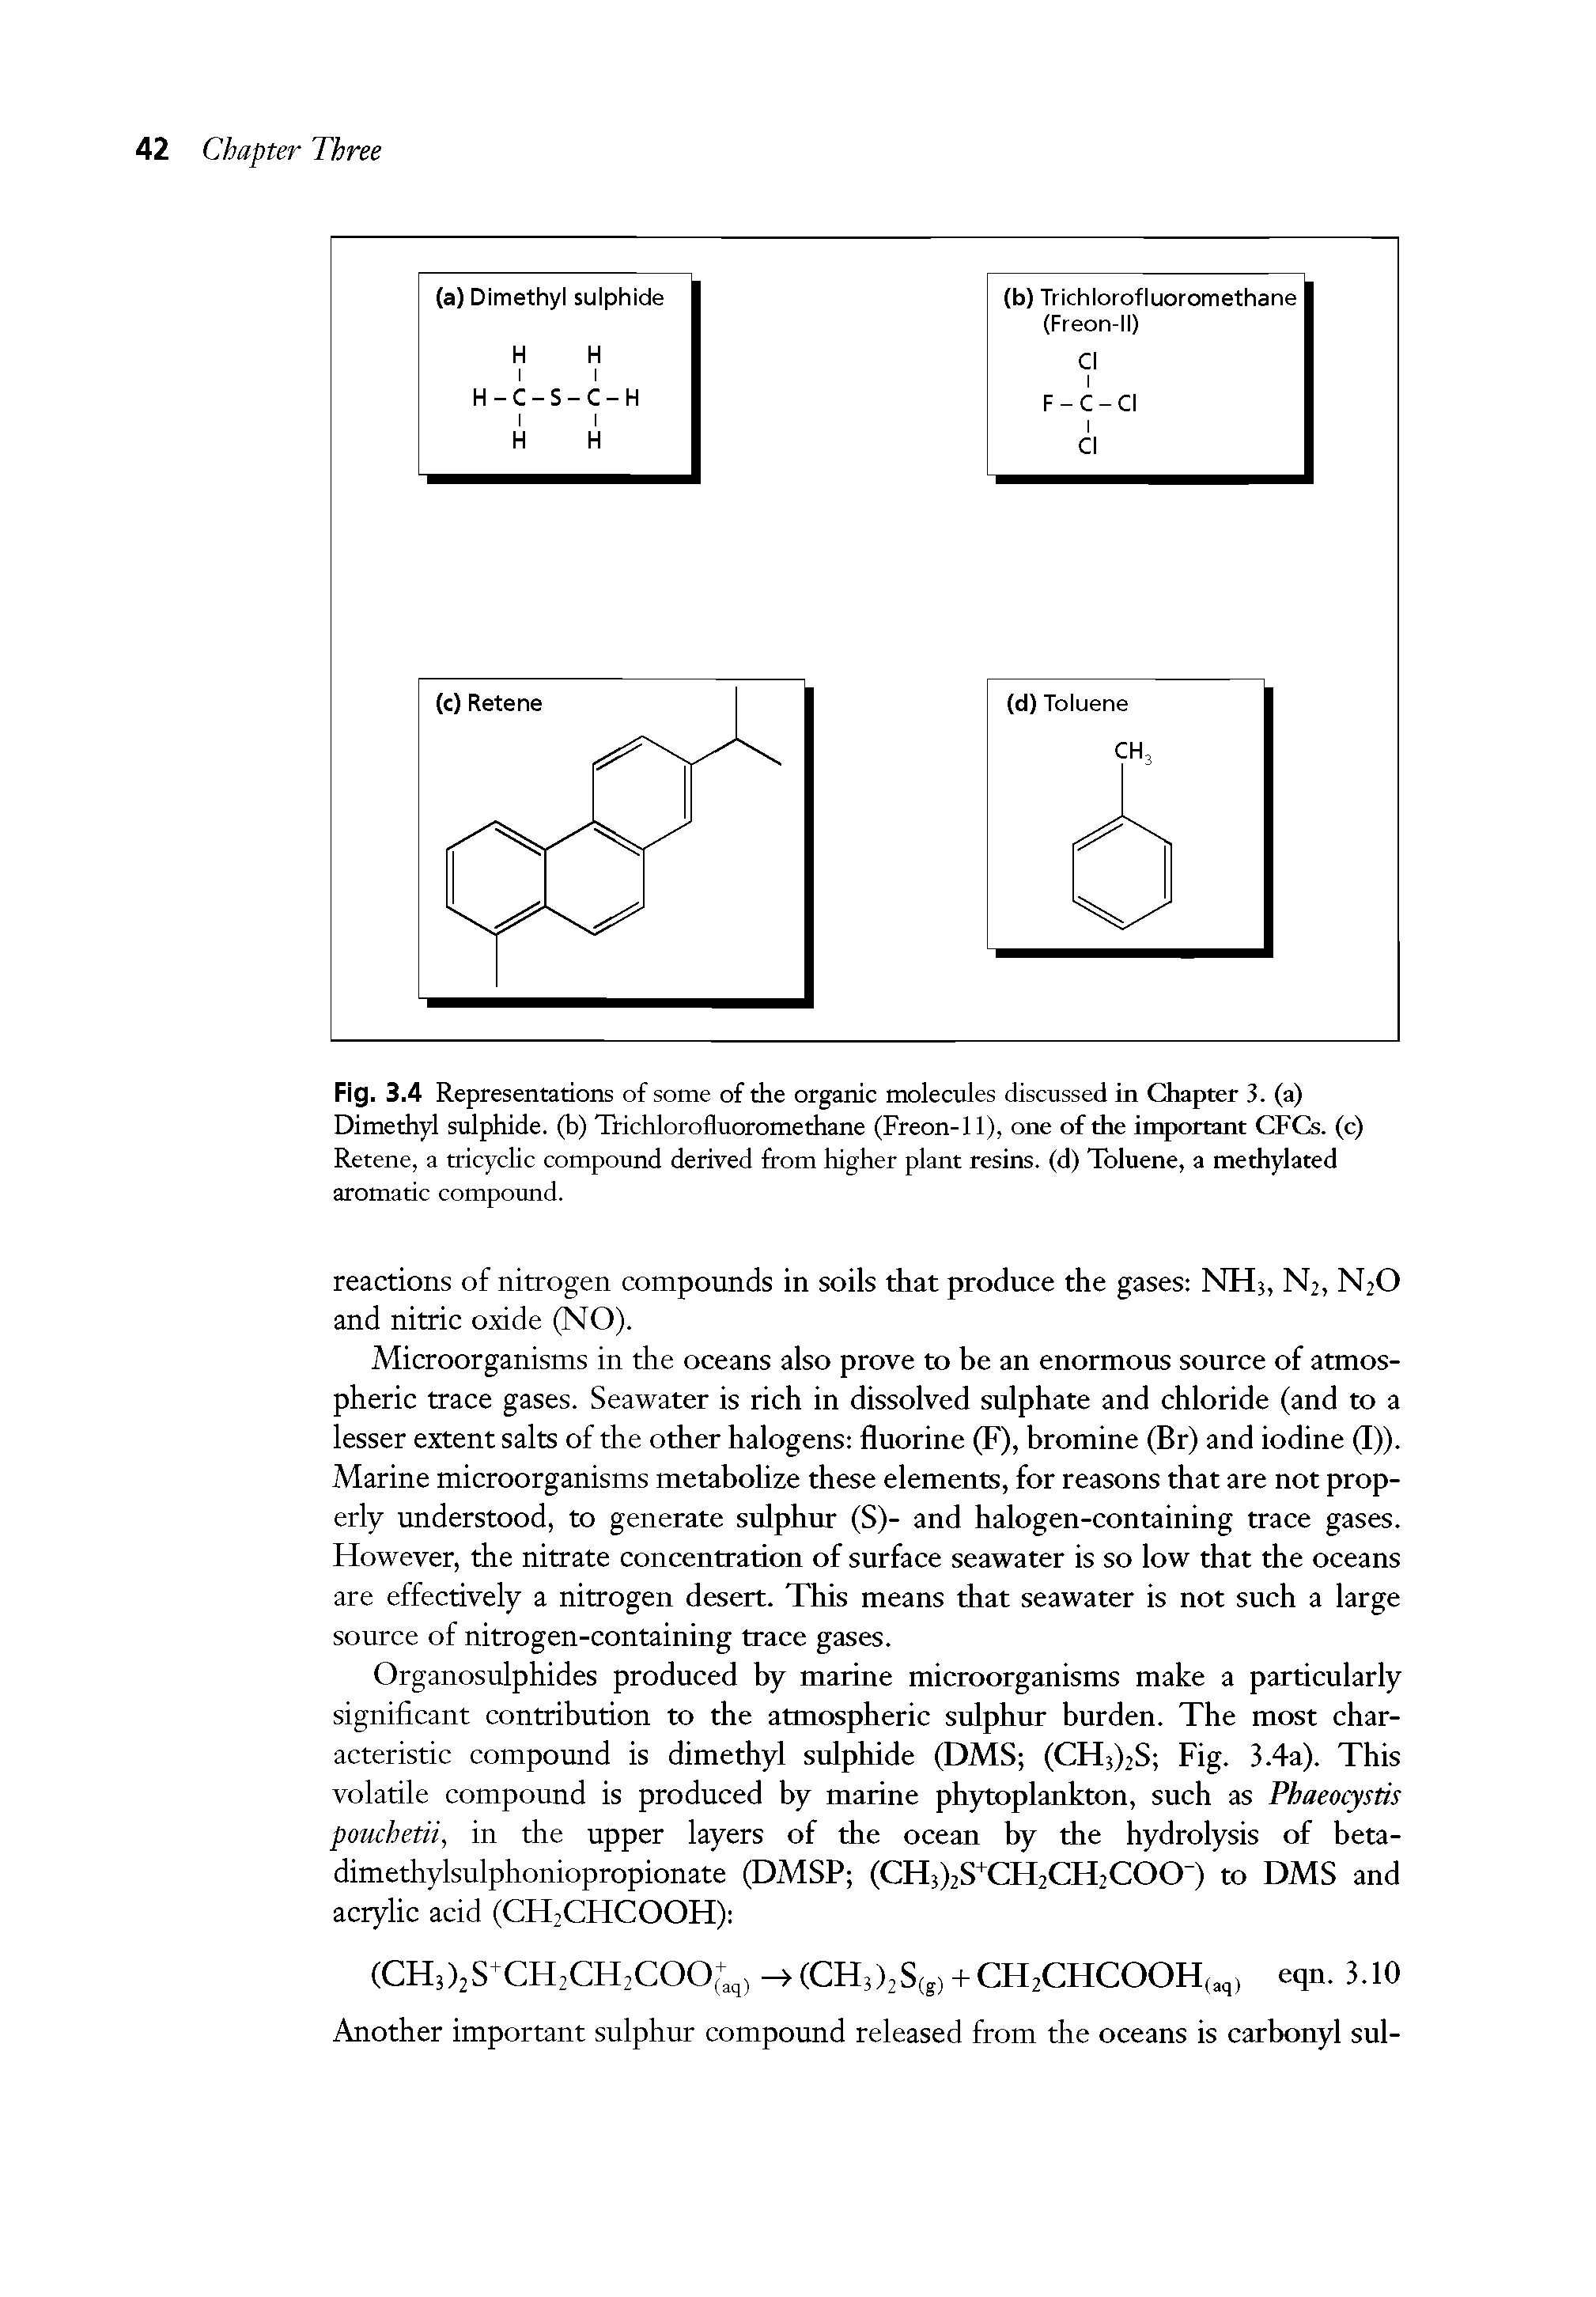 Fig. 3.4 Representations of some of the organic molecules discussed in Chapter 3. (a) Dimethyl sulphide, (b) Trichlorofluoromethane (Freon-11), one of the important CFCs. (c) Retene, a tricyclic compound derived from higher plant resins, (d) Toluene, a methylated aromatic compound.